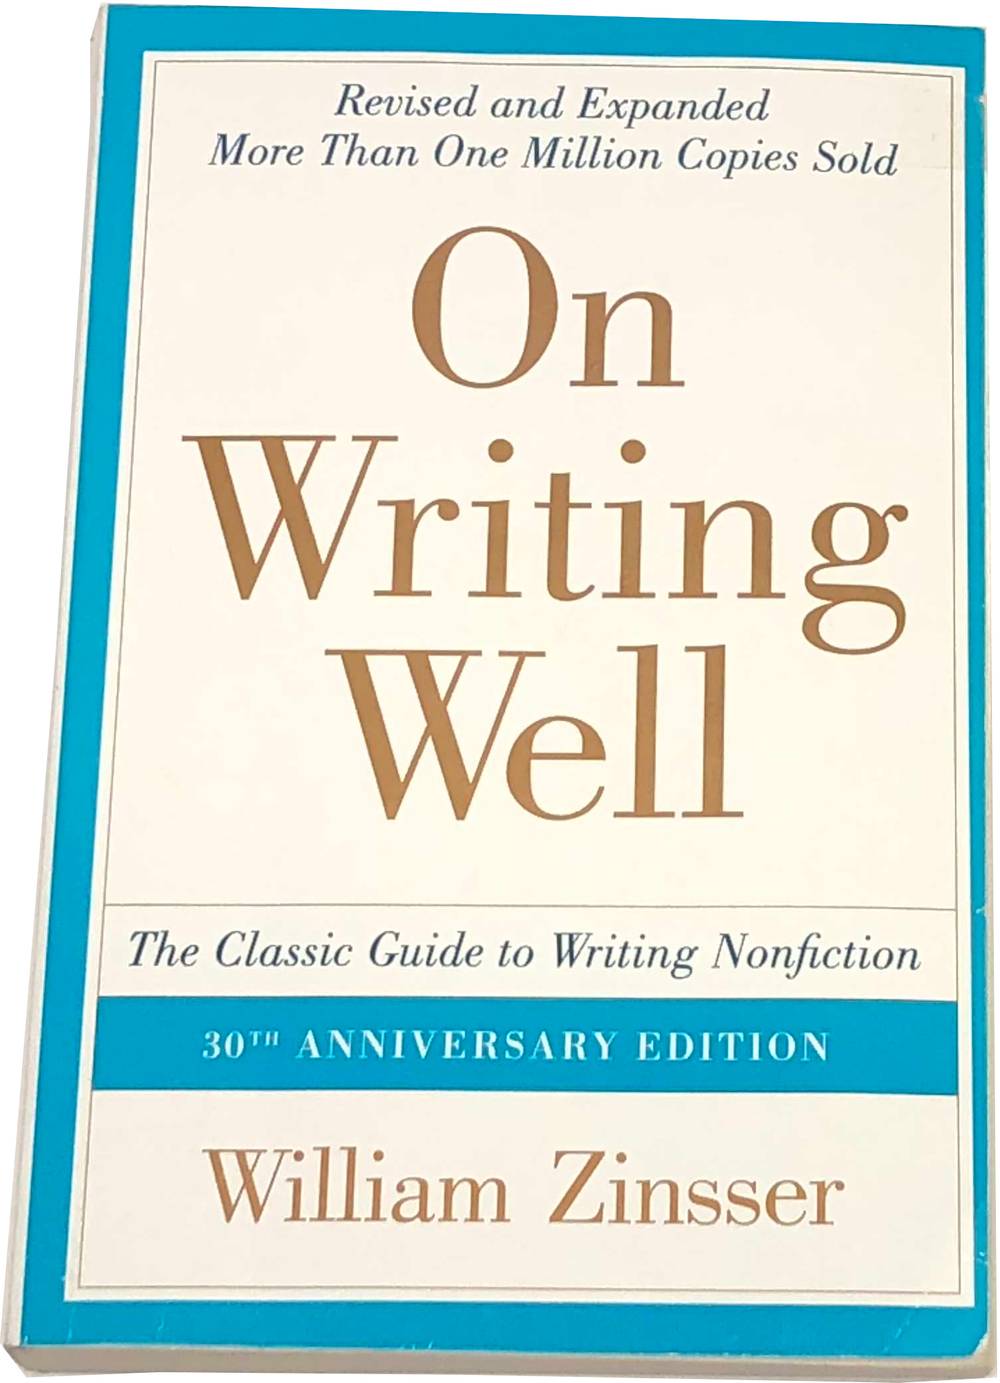 Book image of On Writing Well.